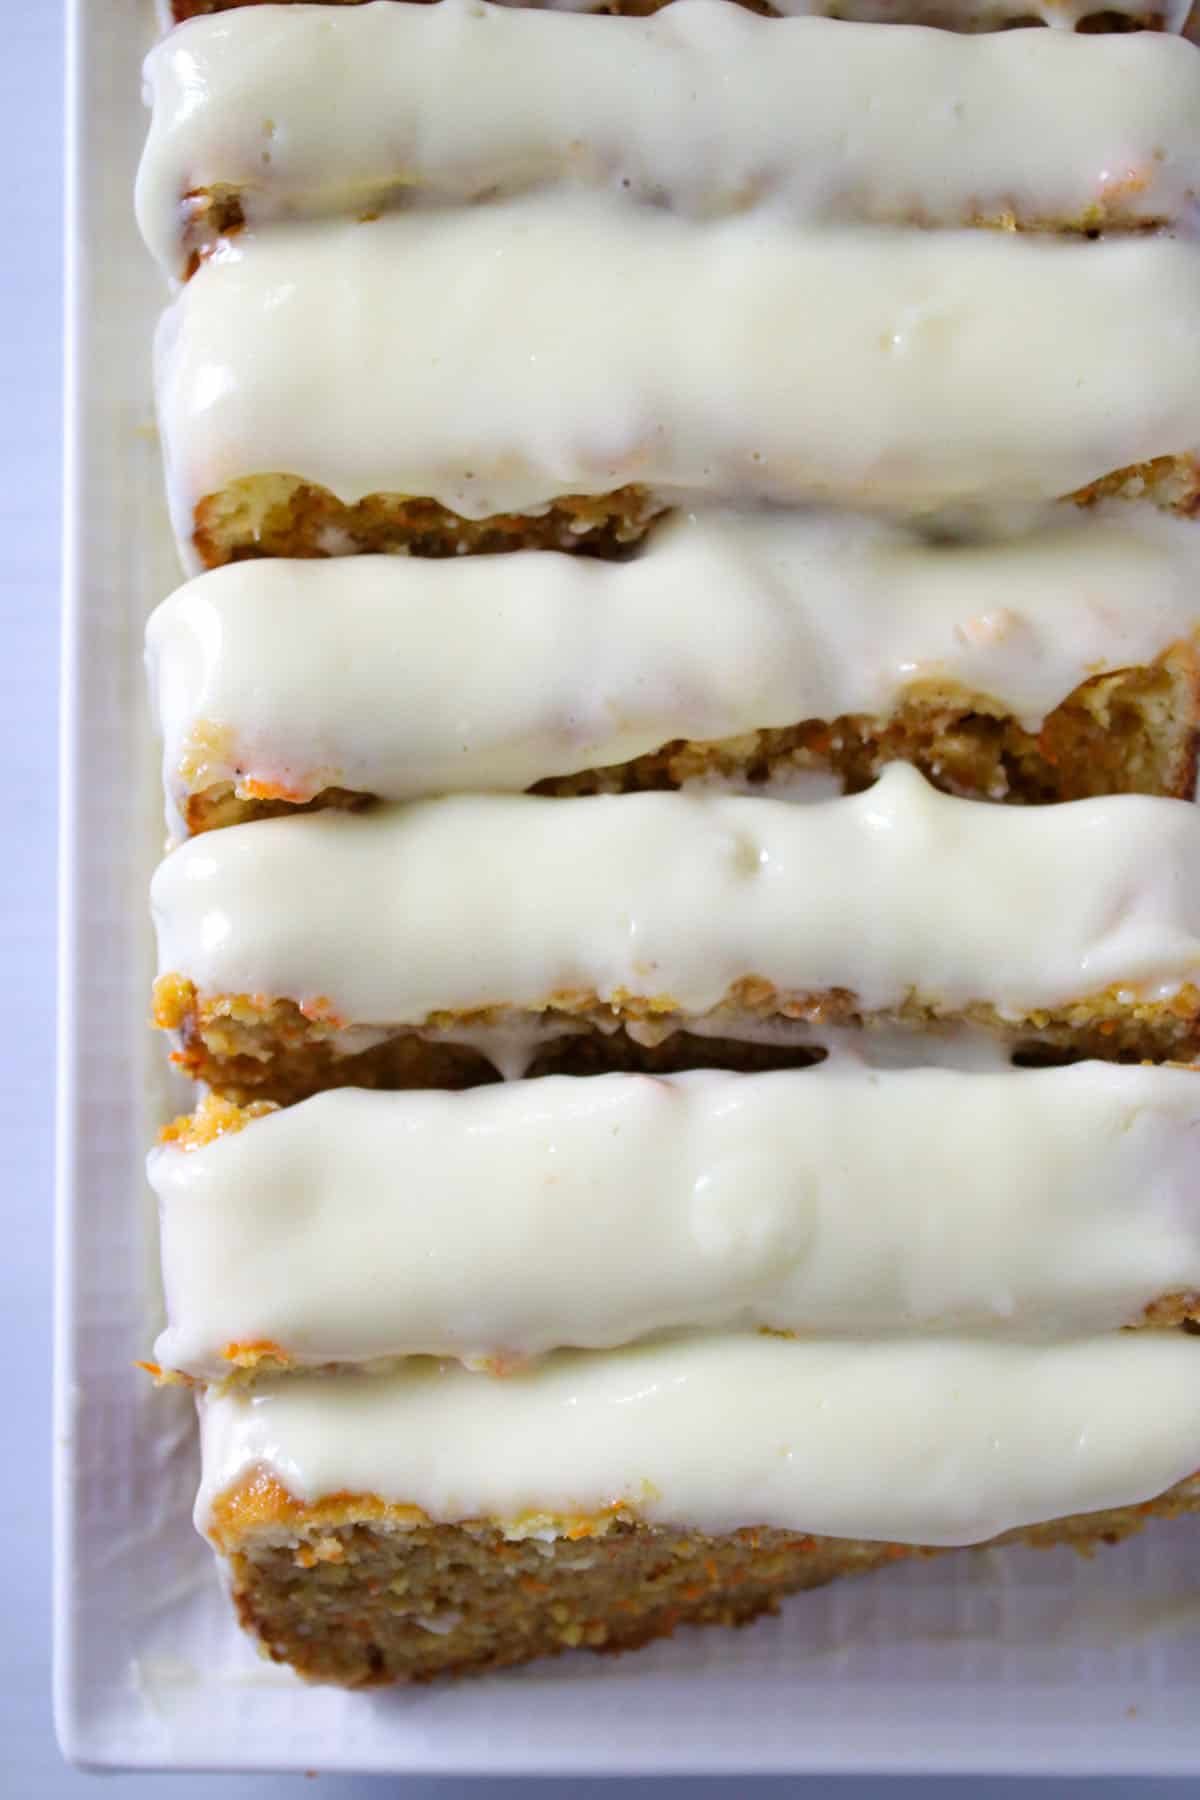 Top shot of Carrot Loaf Cake cut into slices.